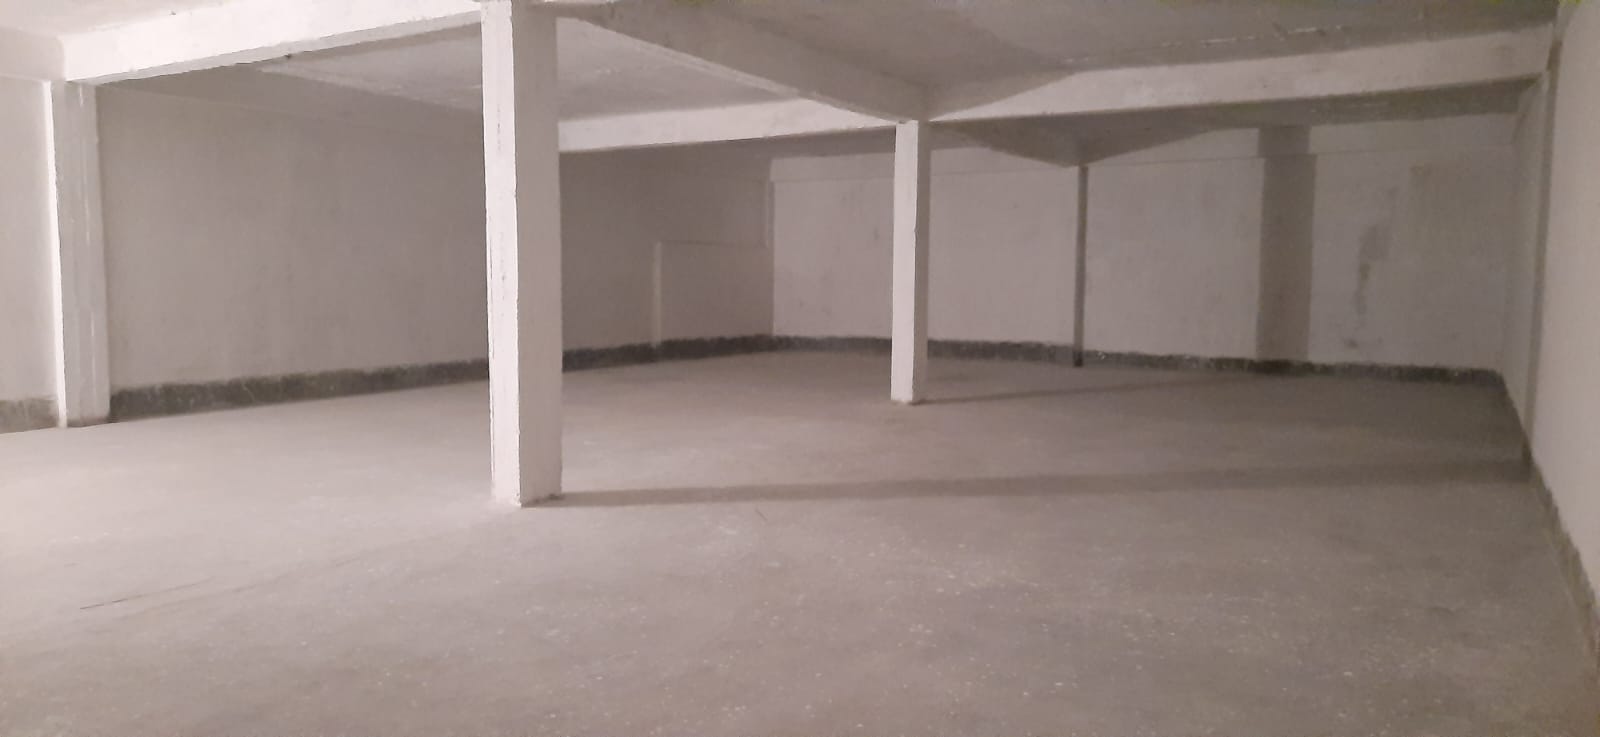 2500 Sq Feet Commercial Warehouses/Godowns for Rent Only in B.B.D. Bagh